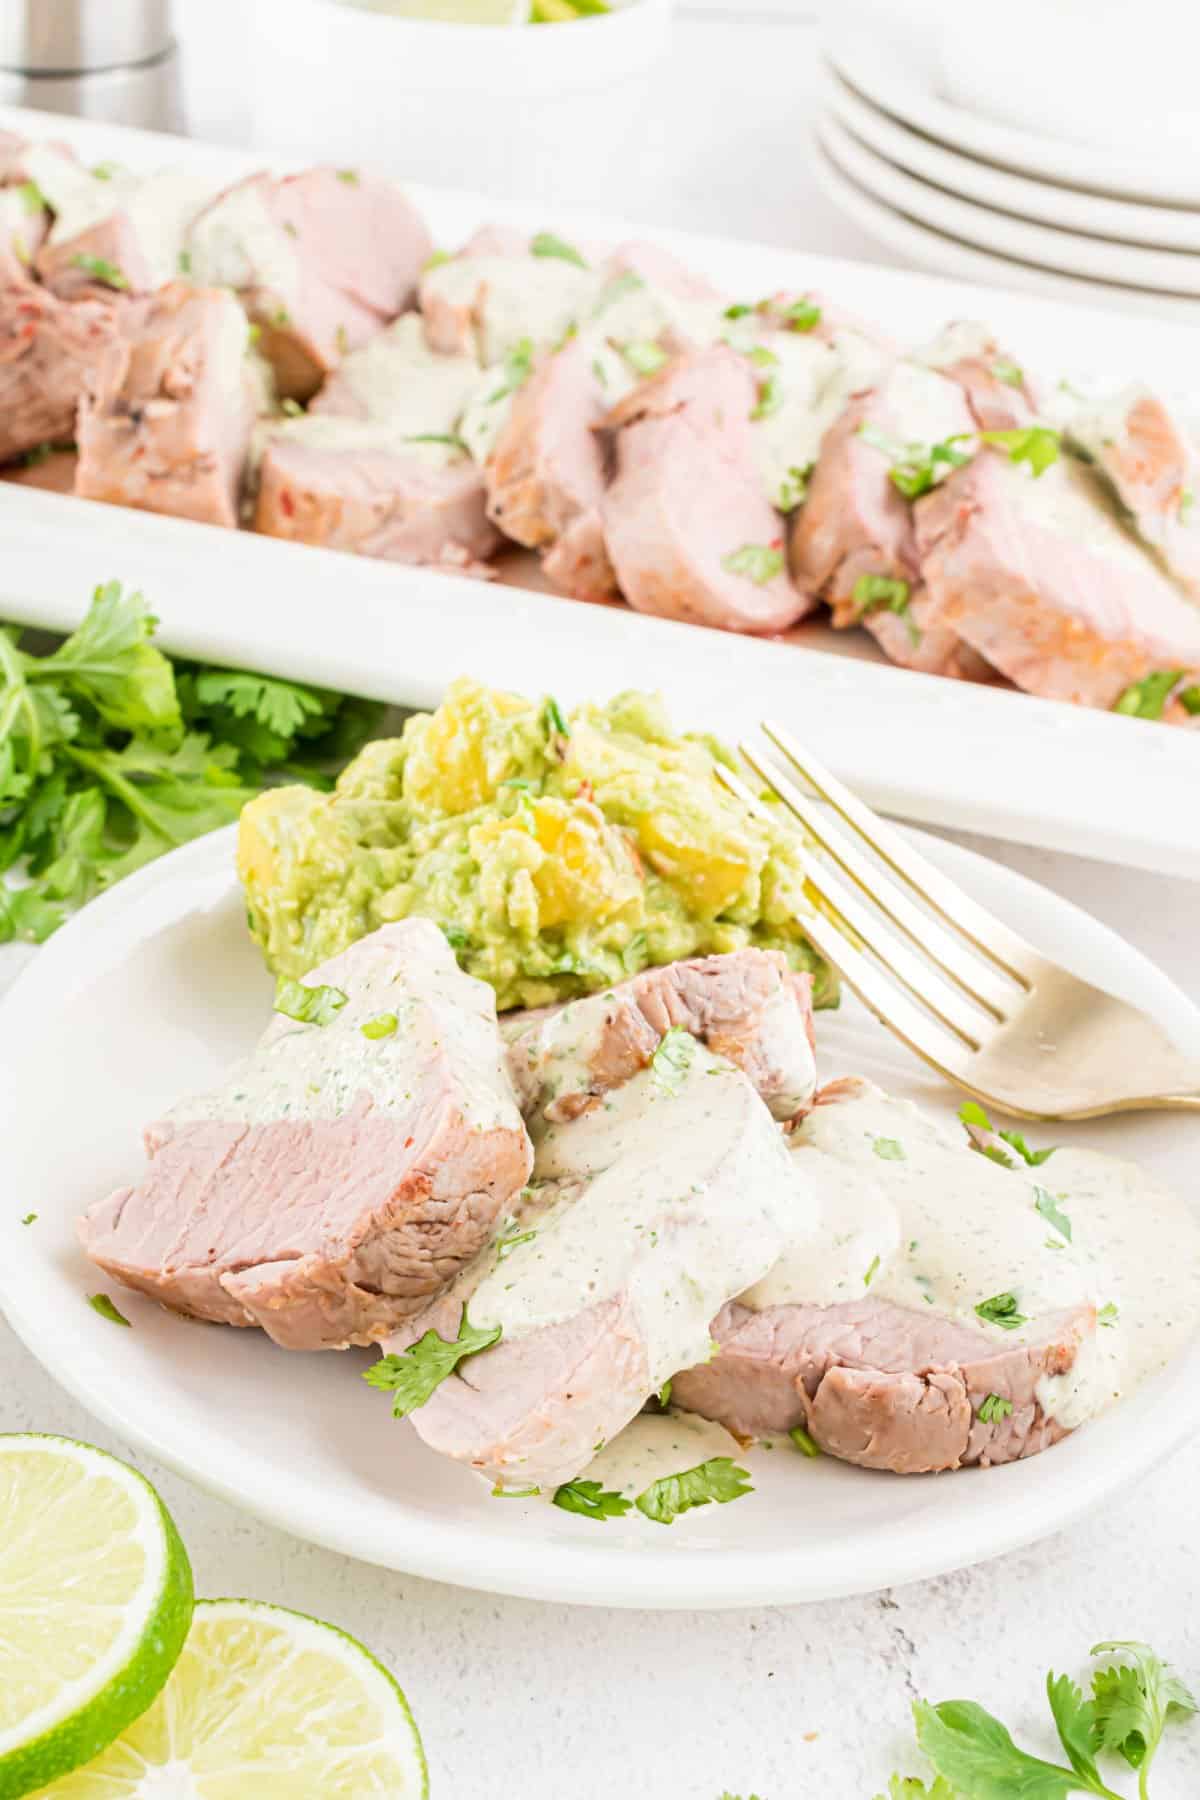 Slices of pork tenderloin with cilantro lime sauce on a white plate.